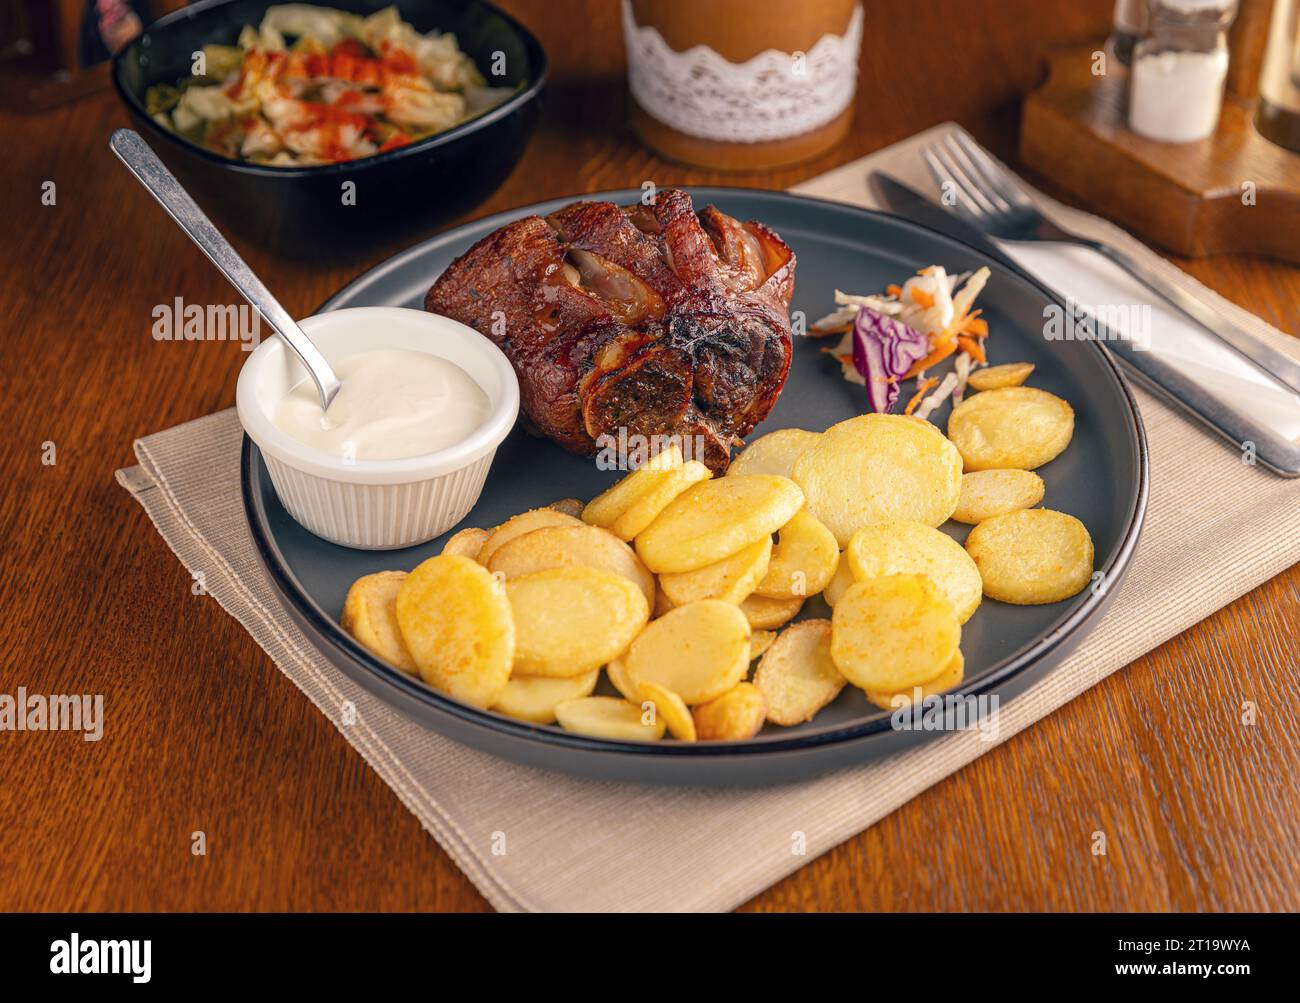 Crispy grilled ham hock served with fries and sauce. Roasted pork knuckle with potatoes Stock Photo